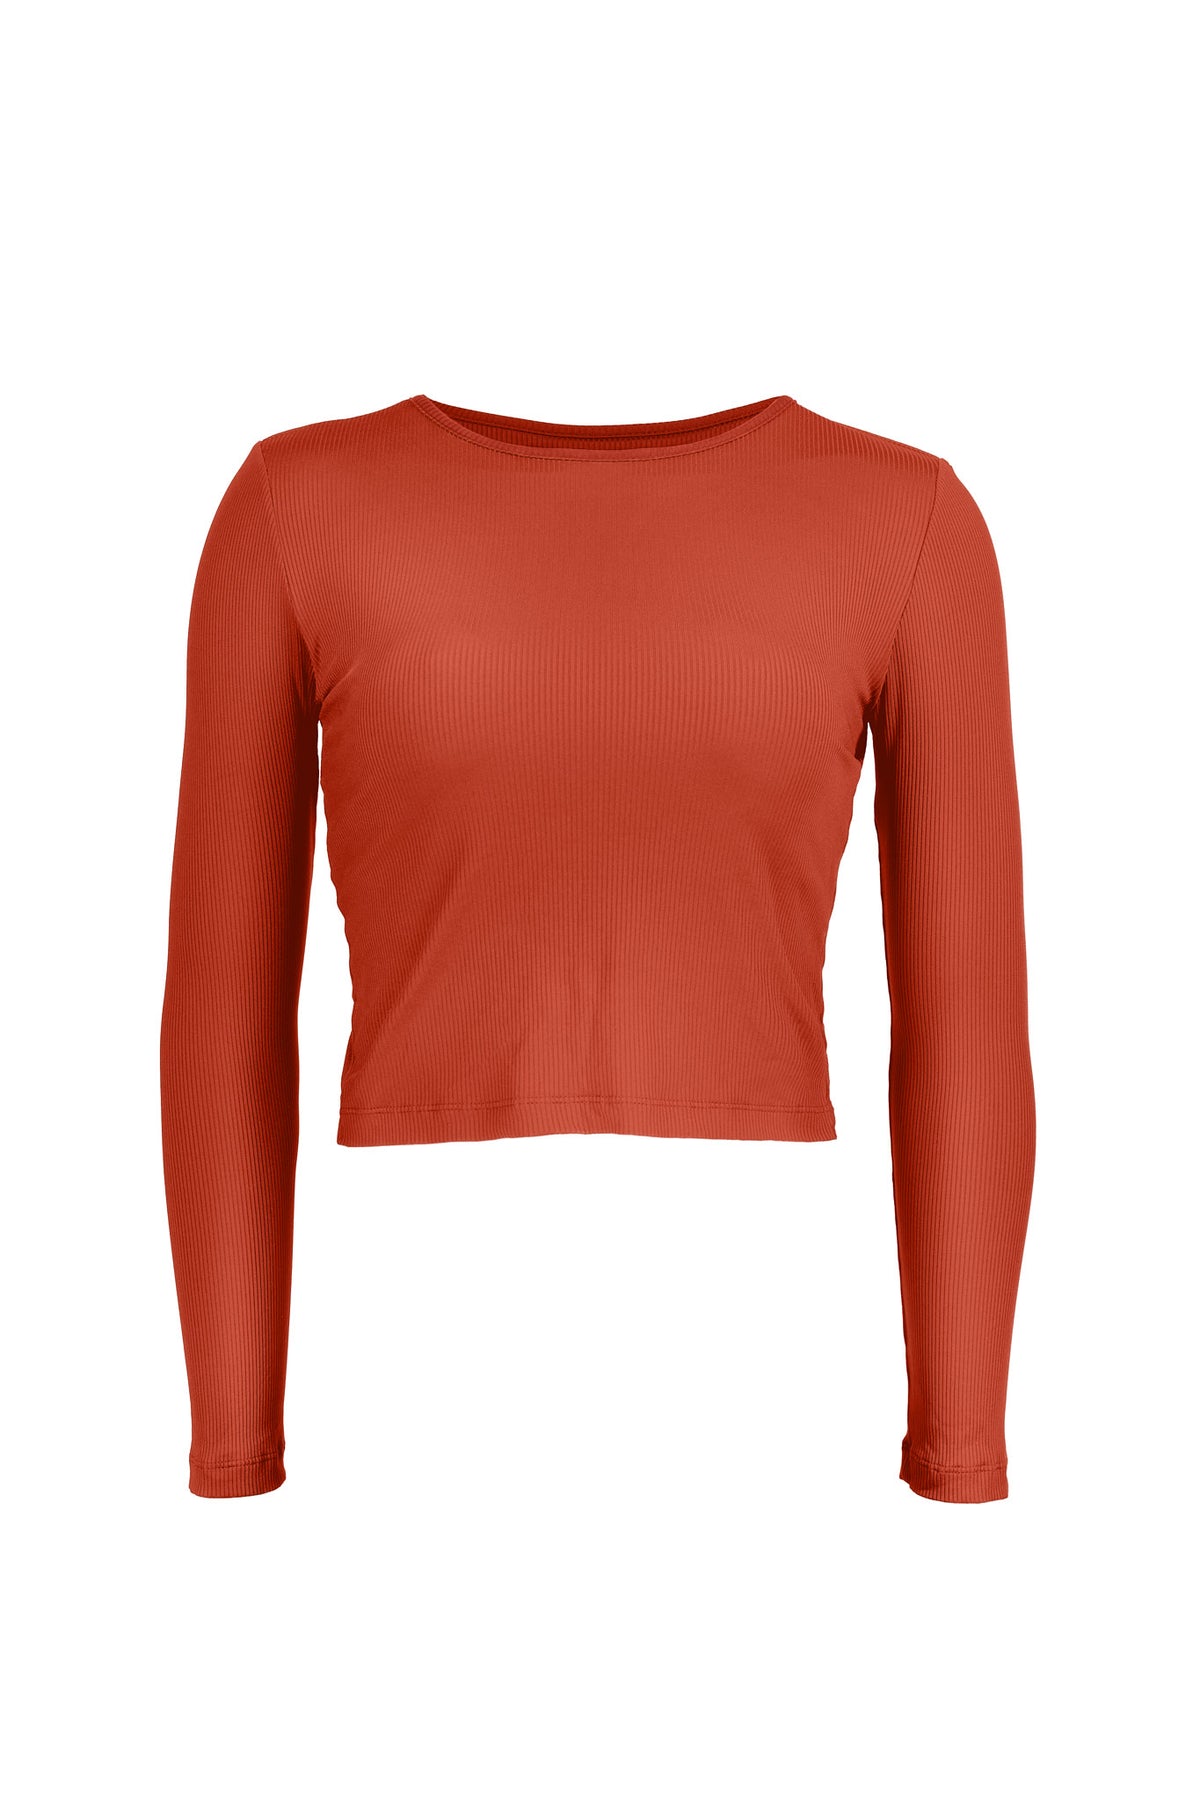 Hybrid Crop Top - chili red